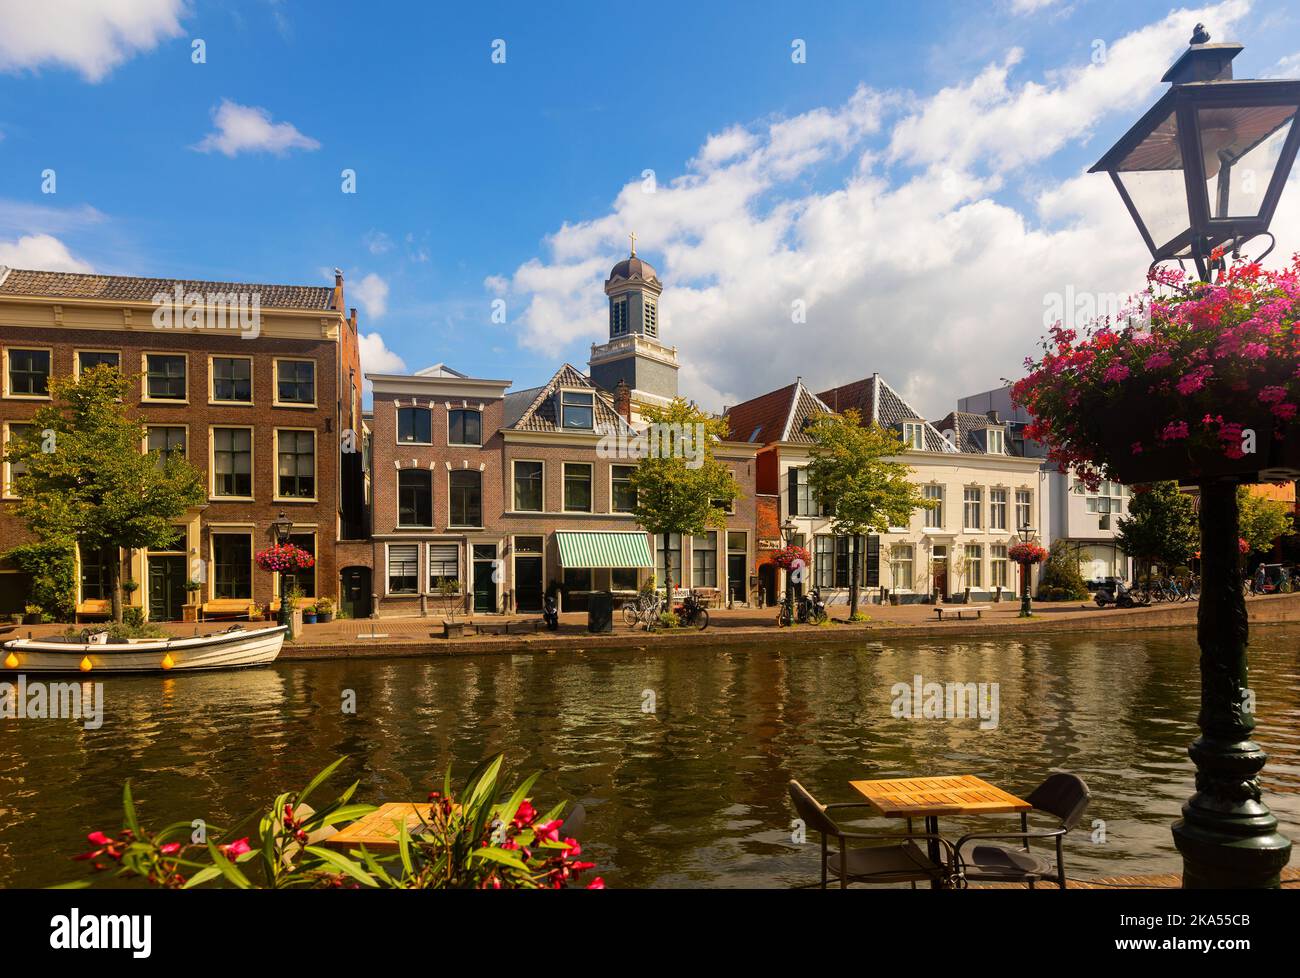 Streets and canals of Leiden town, Netherlands Stock Photo